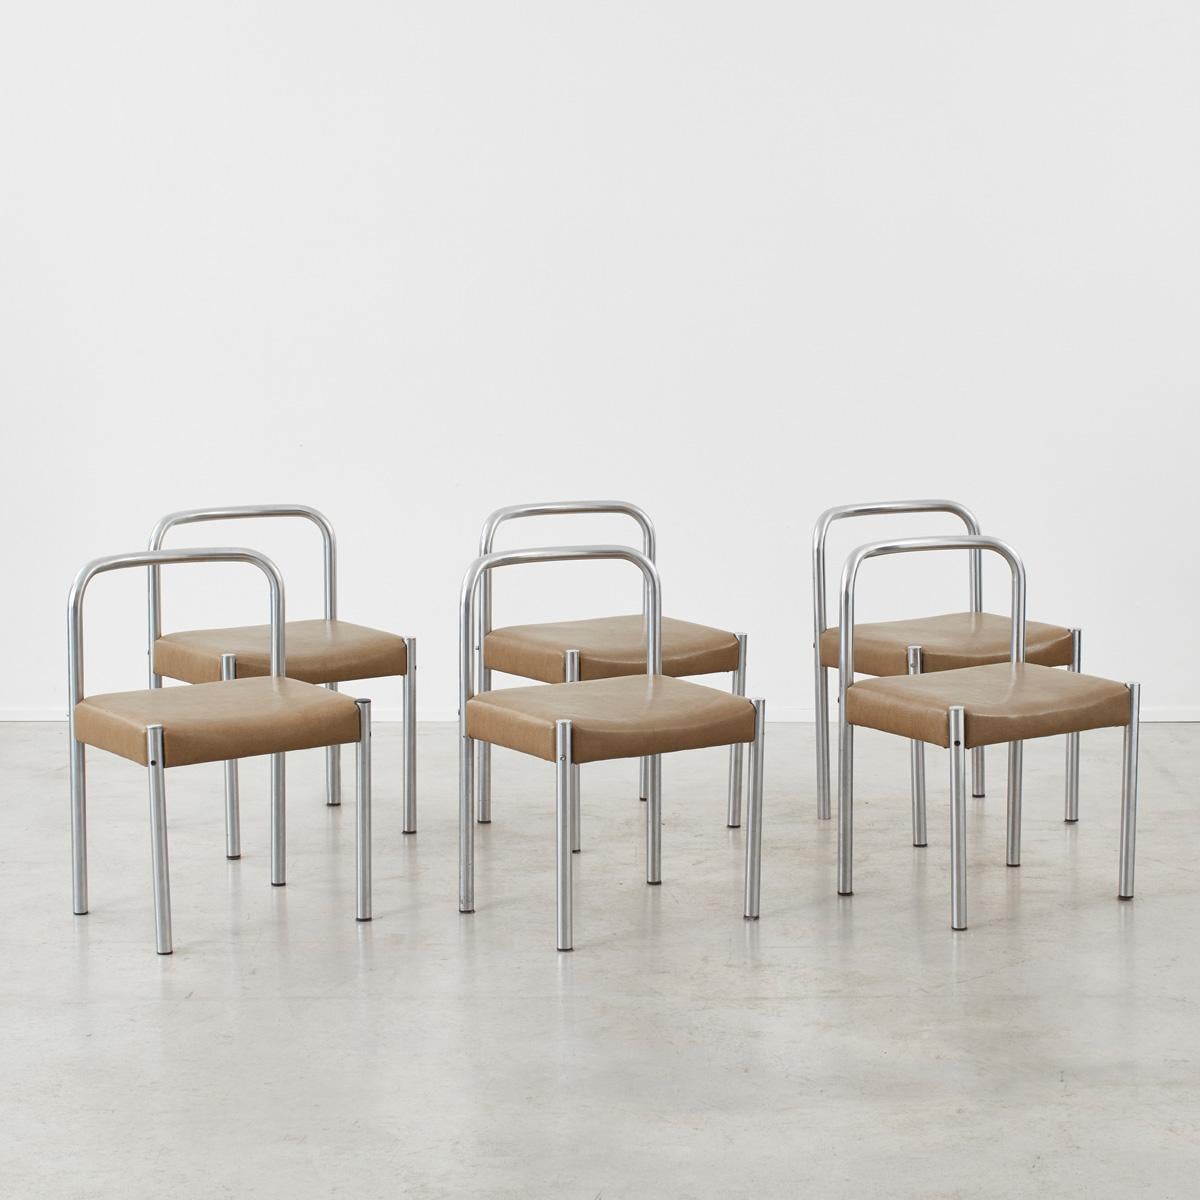 Price for the set of six chairs.

Martin Visser (1922-2009) was a celebrated Dutch furniture designer and art collector. He became Head Furniture Buyer for De Bijenkorf department store in Amsterdam after he presented one of the store’s buyers a